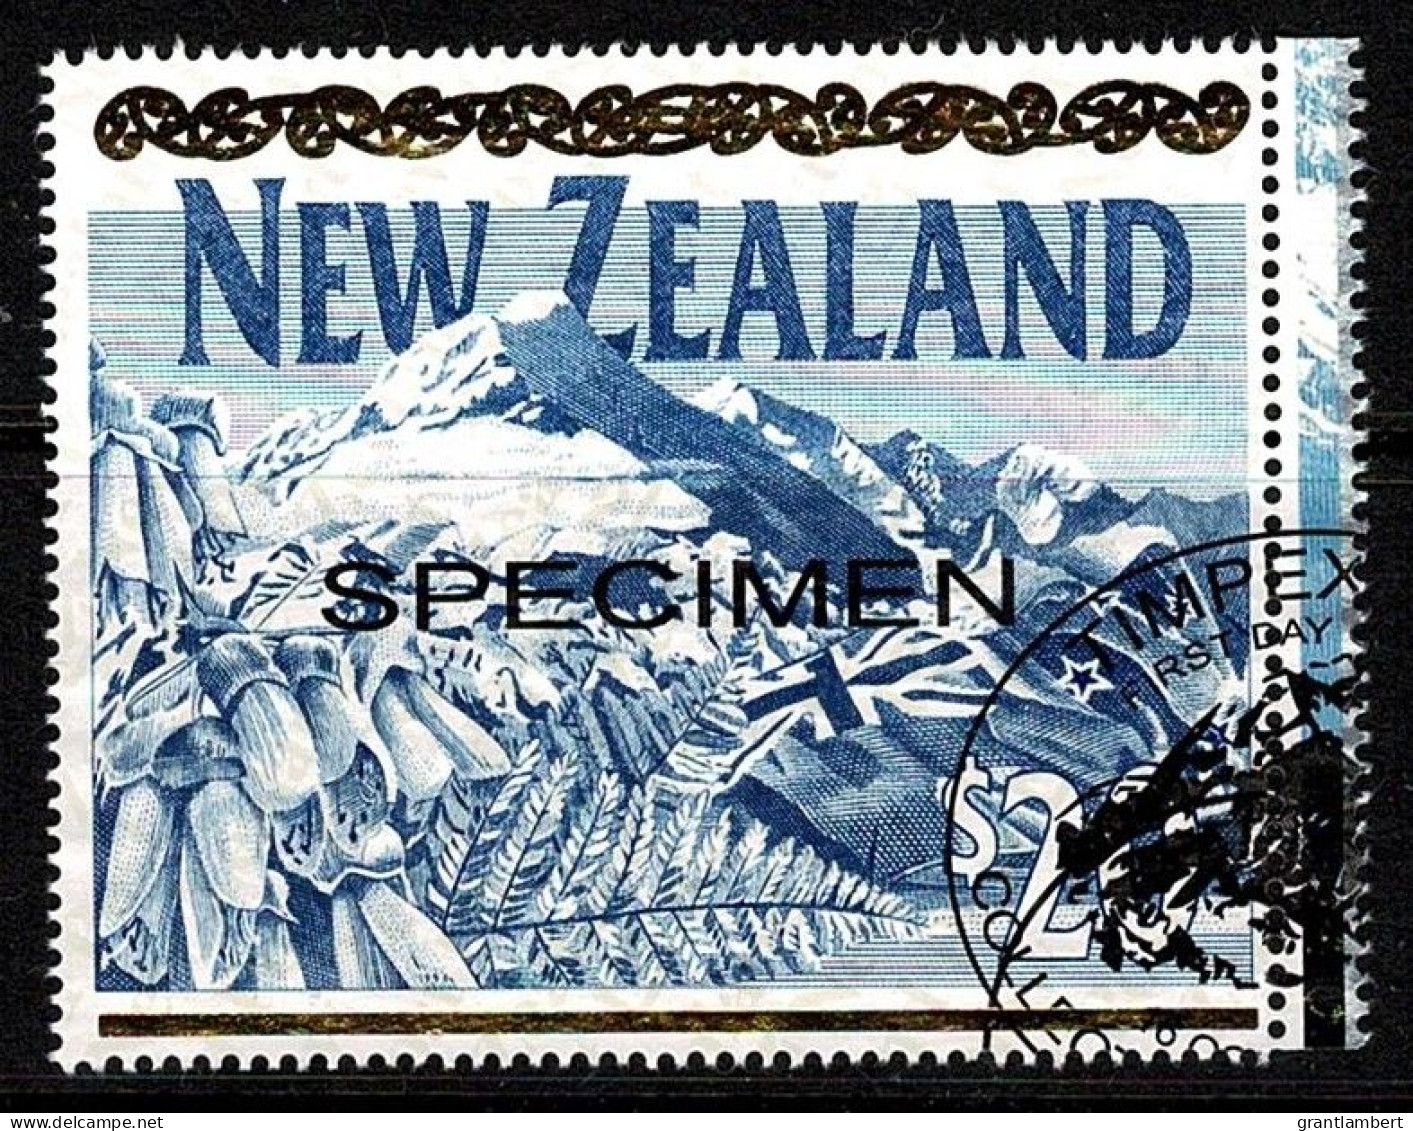 New Zealand 2009 Mt. Cook  $20 SPECIMEN Used - Used Stamps